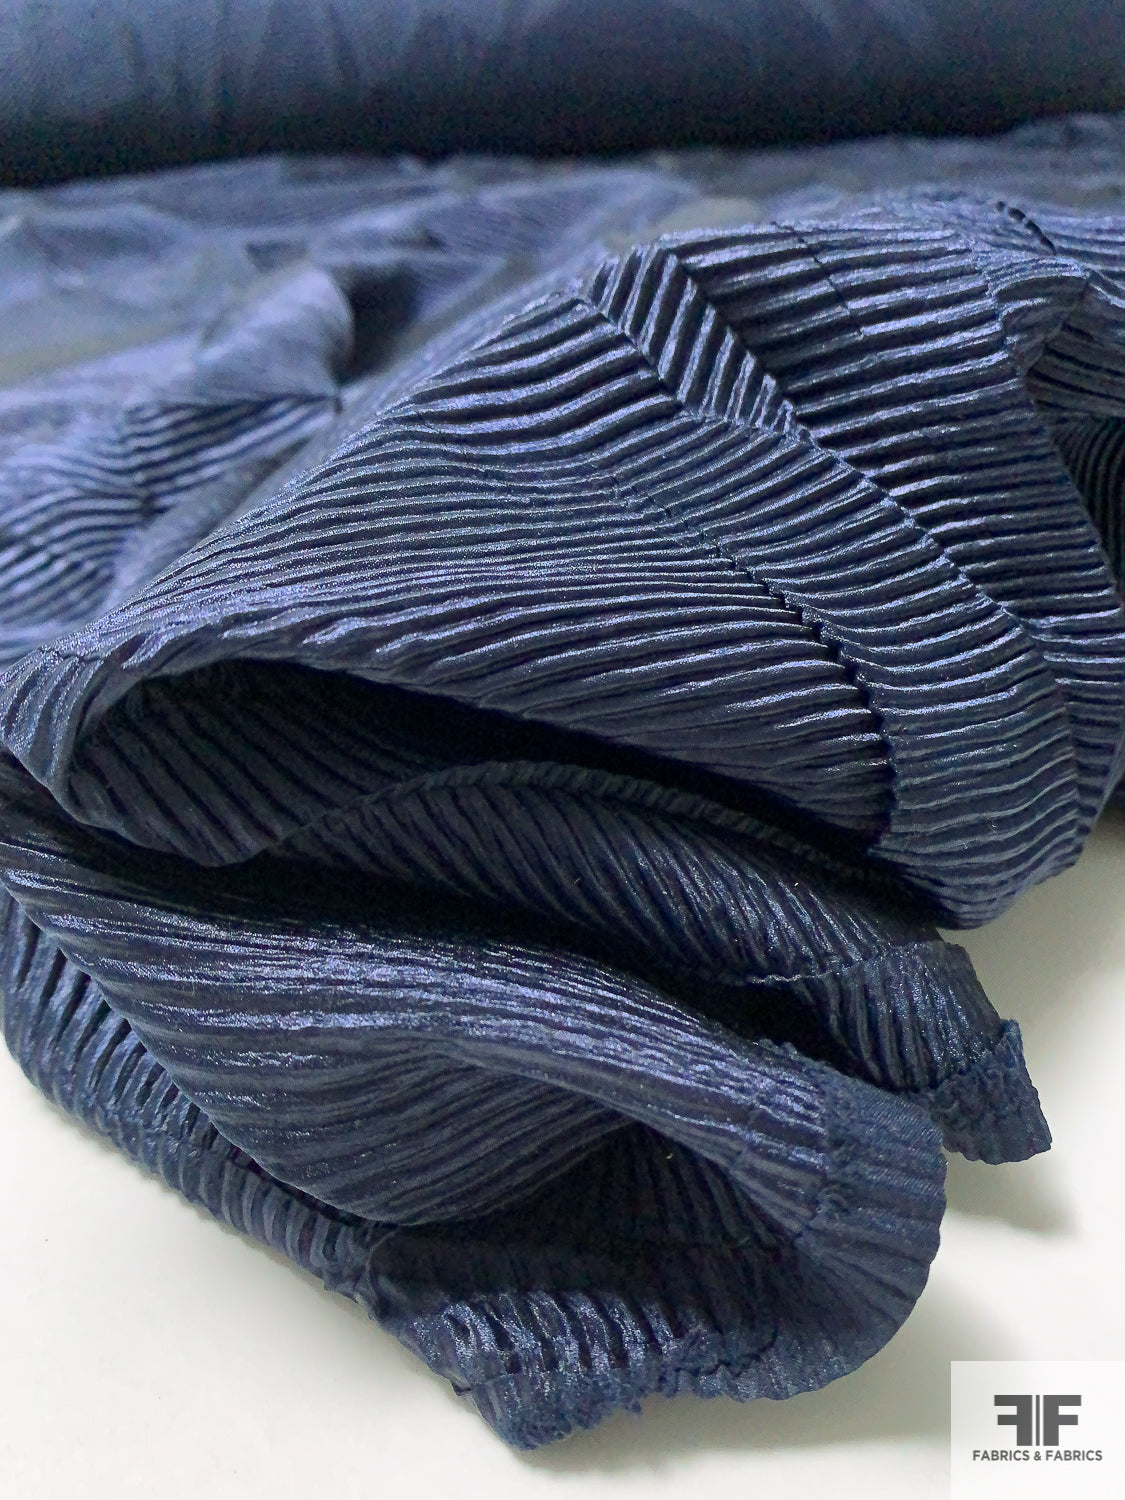 Multi-Directional Origami Like Pleated Lightweight Polyester Satin - Navy